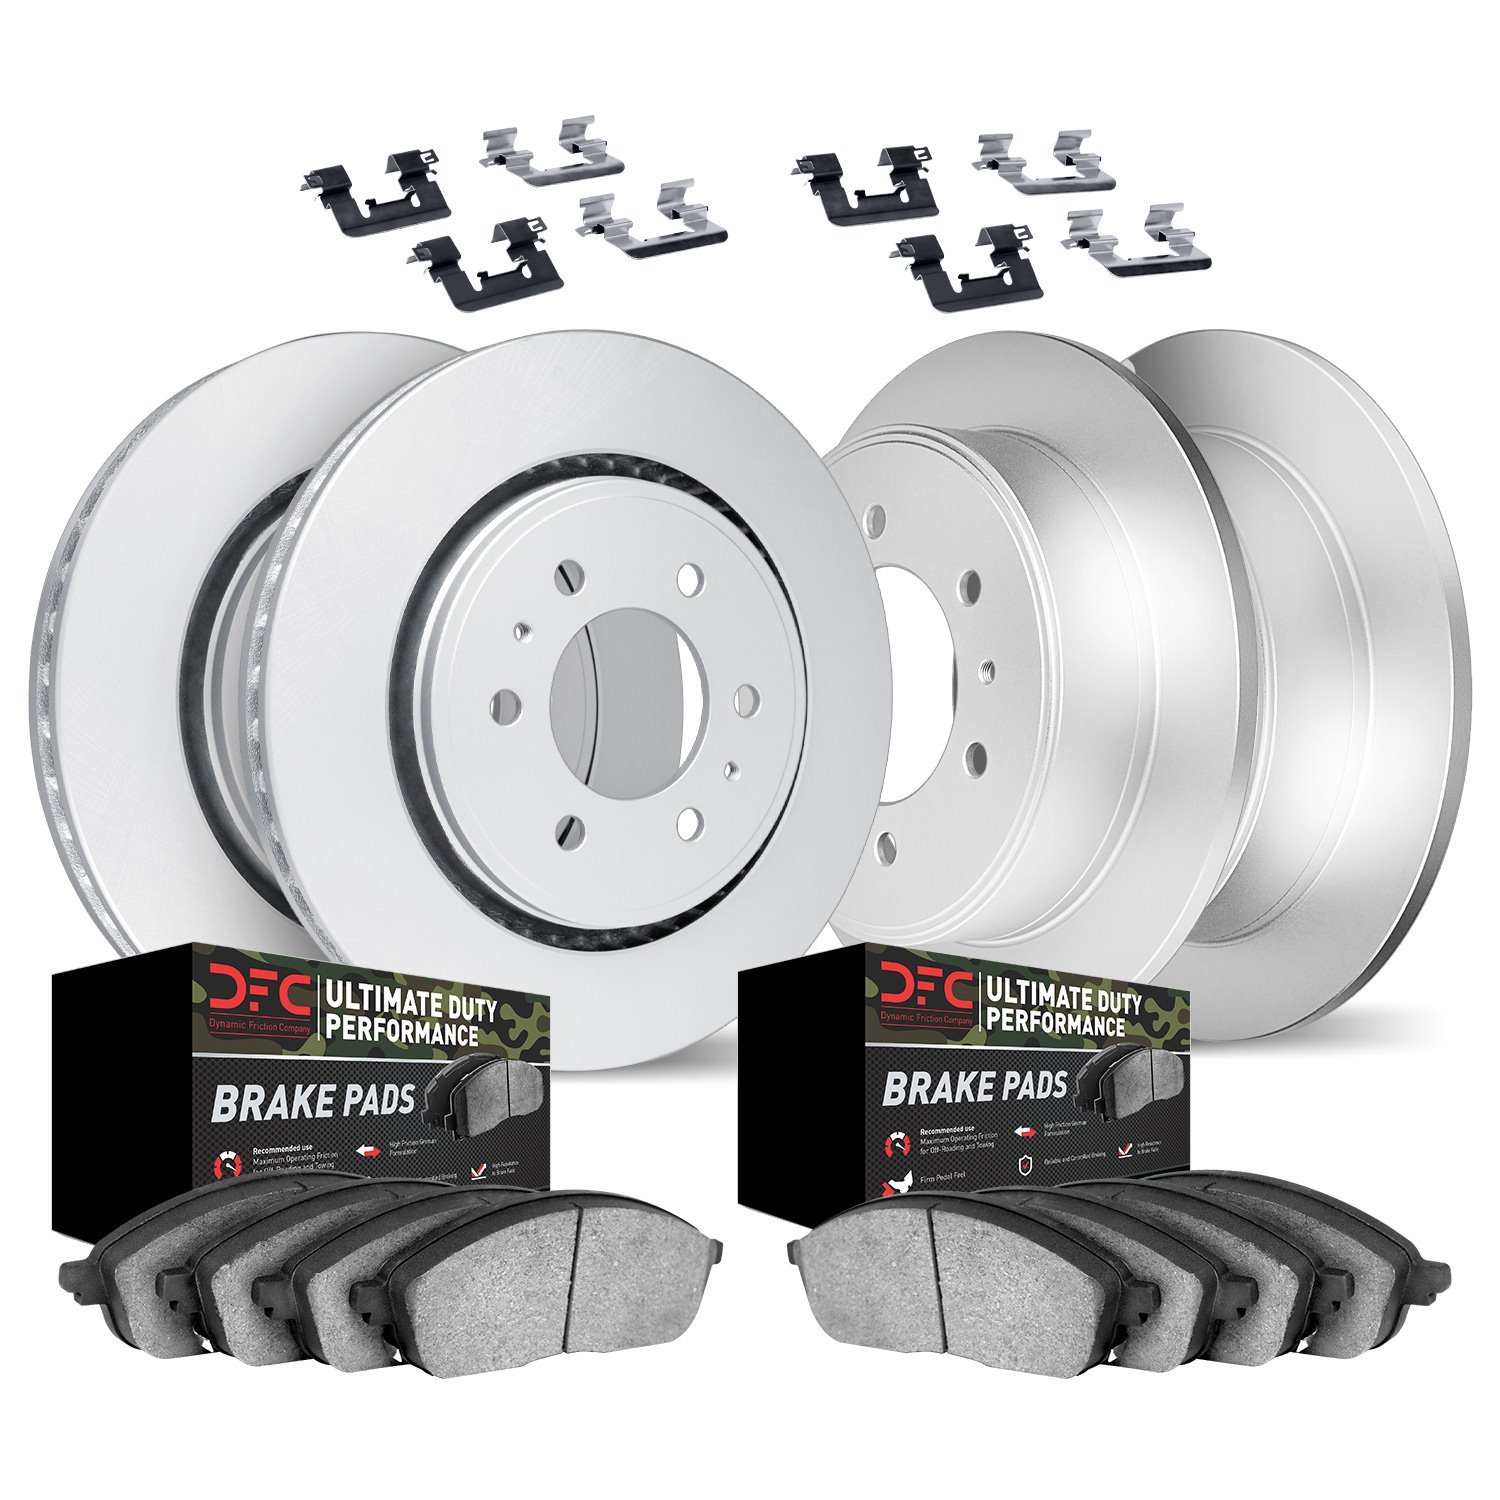 4414-67003 Geospec Brake Rotors with Ultimate-Duty Brake Pads & Hardware, 2005-2007 Infiniti/Nissan, Position: Front and Rear